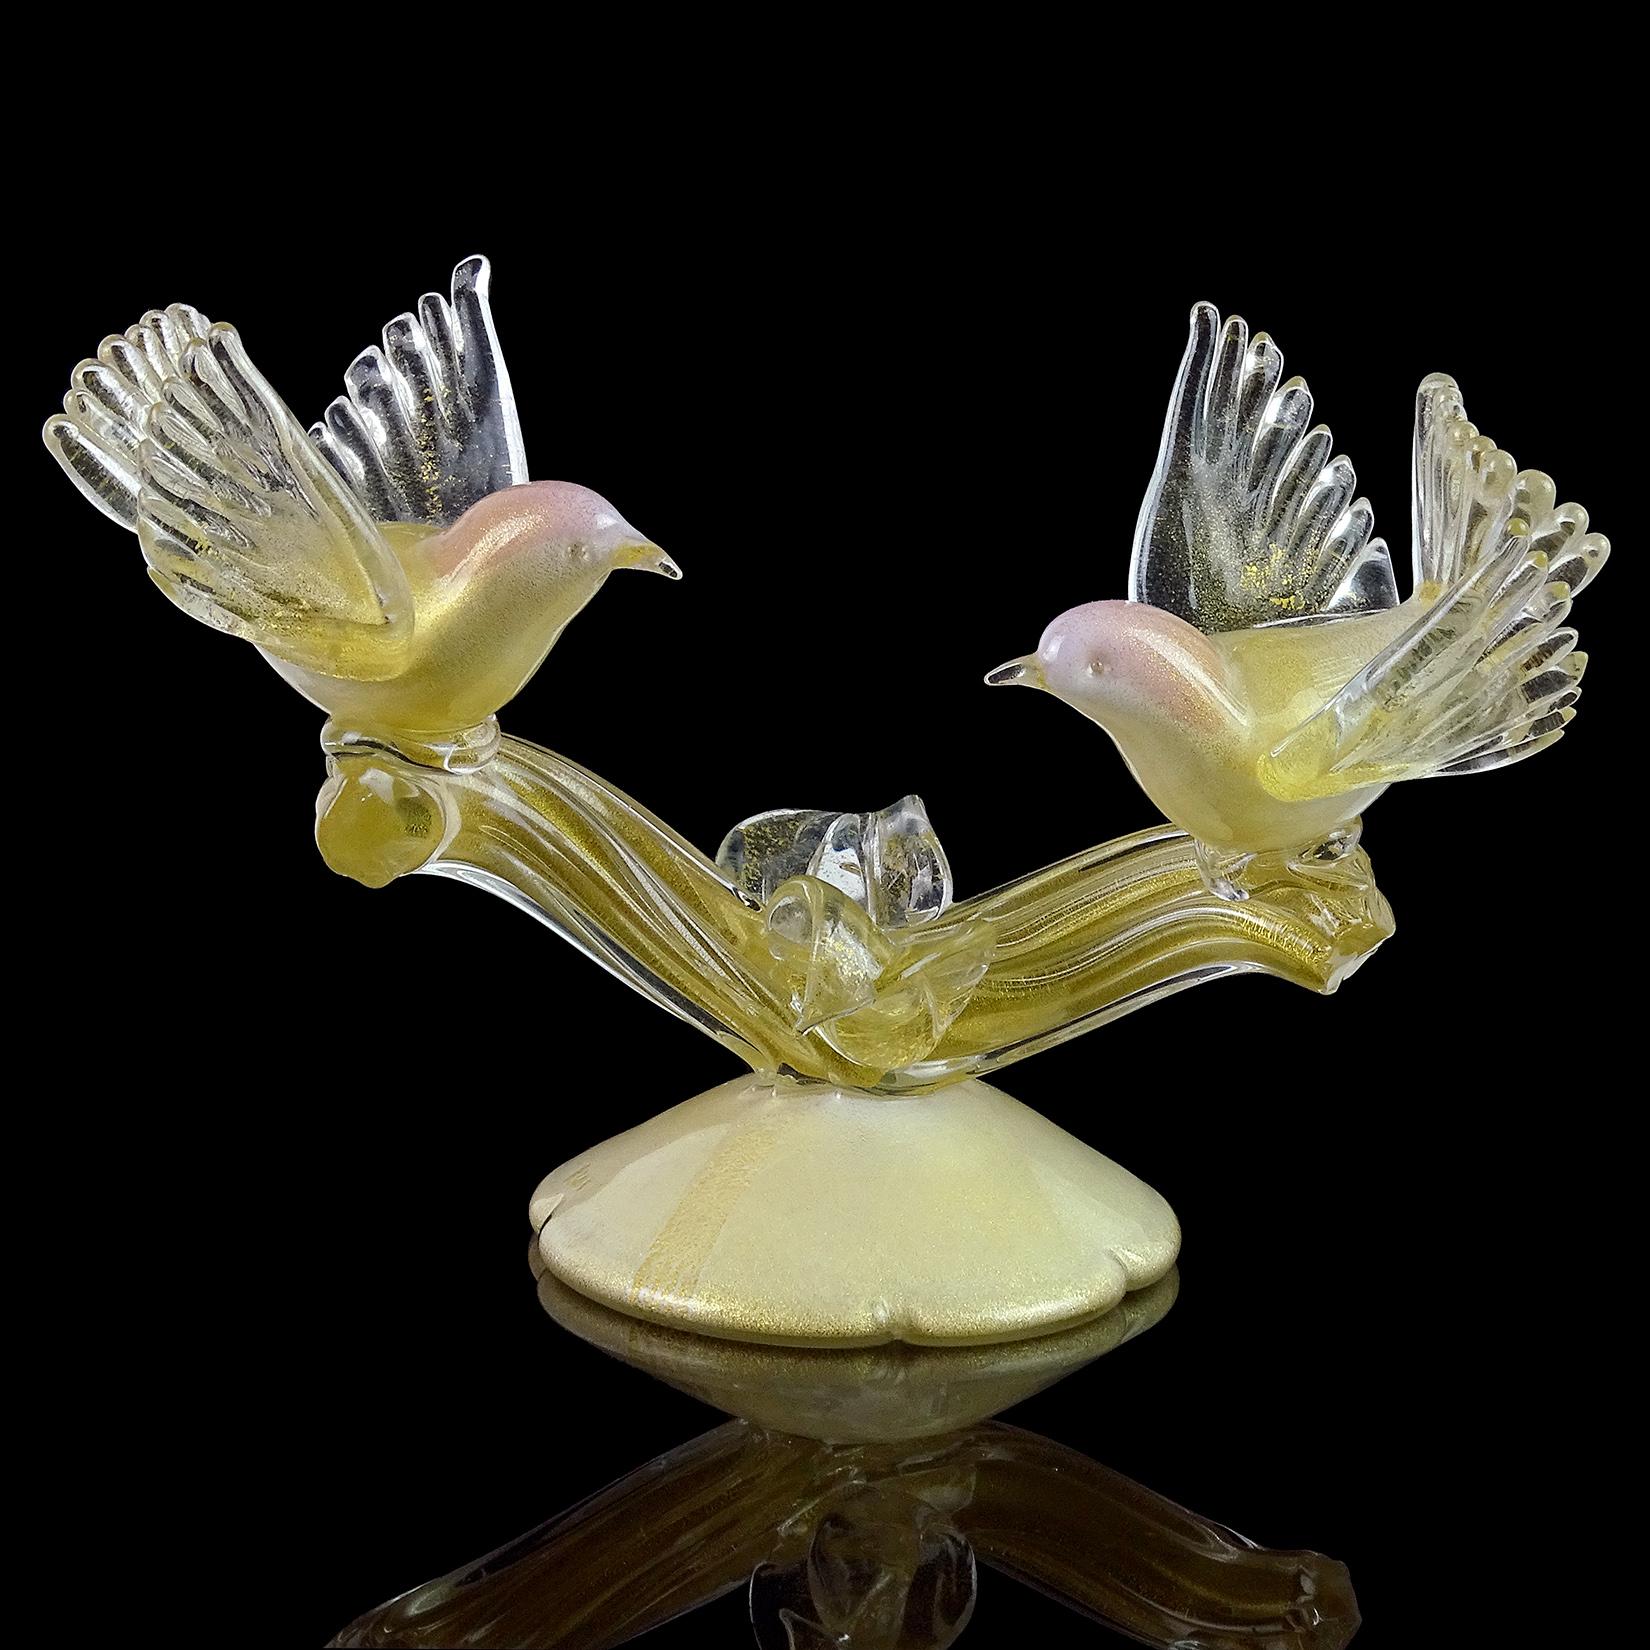 Beautiful Murano hand blown white, pink and gold flecks Italian art glass birds on branch sculpture. Documented as a Alfredo Barbini piece, circa 1950s, and published in his Weil ceramics and glass catalog. Profusely covered in gold leaf throughout.